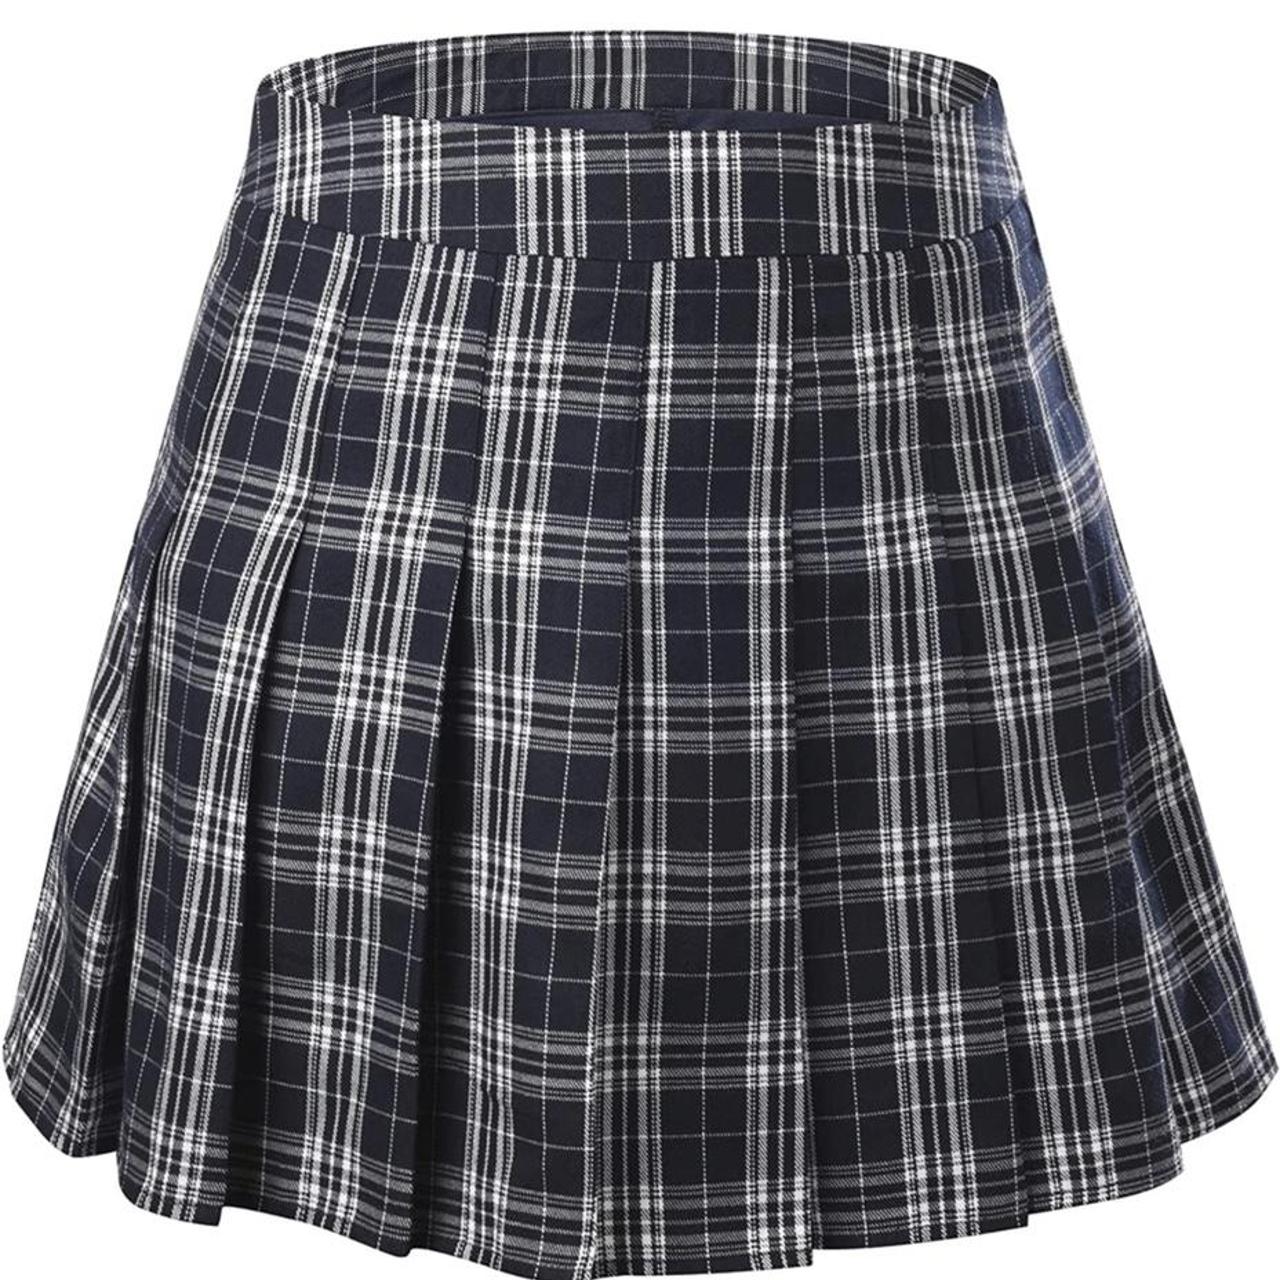 Pleated plaid tennis skirt, in a Uk size 10, worn a... - Depop